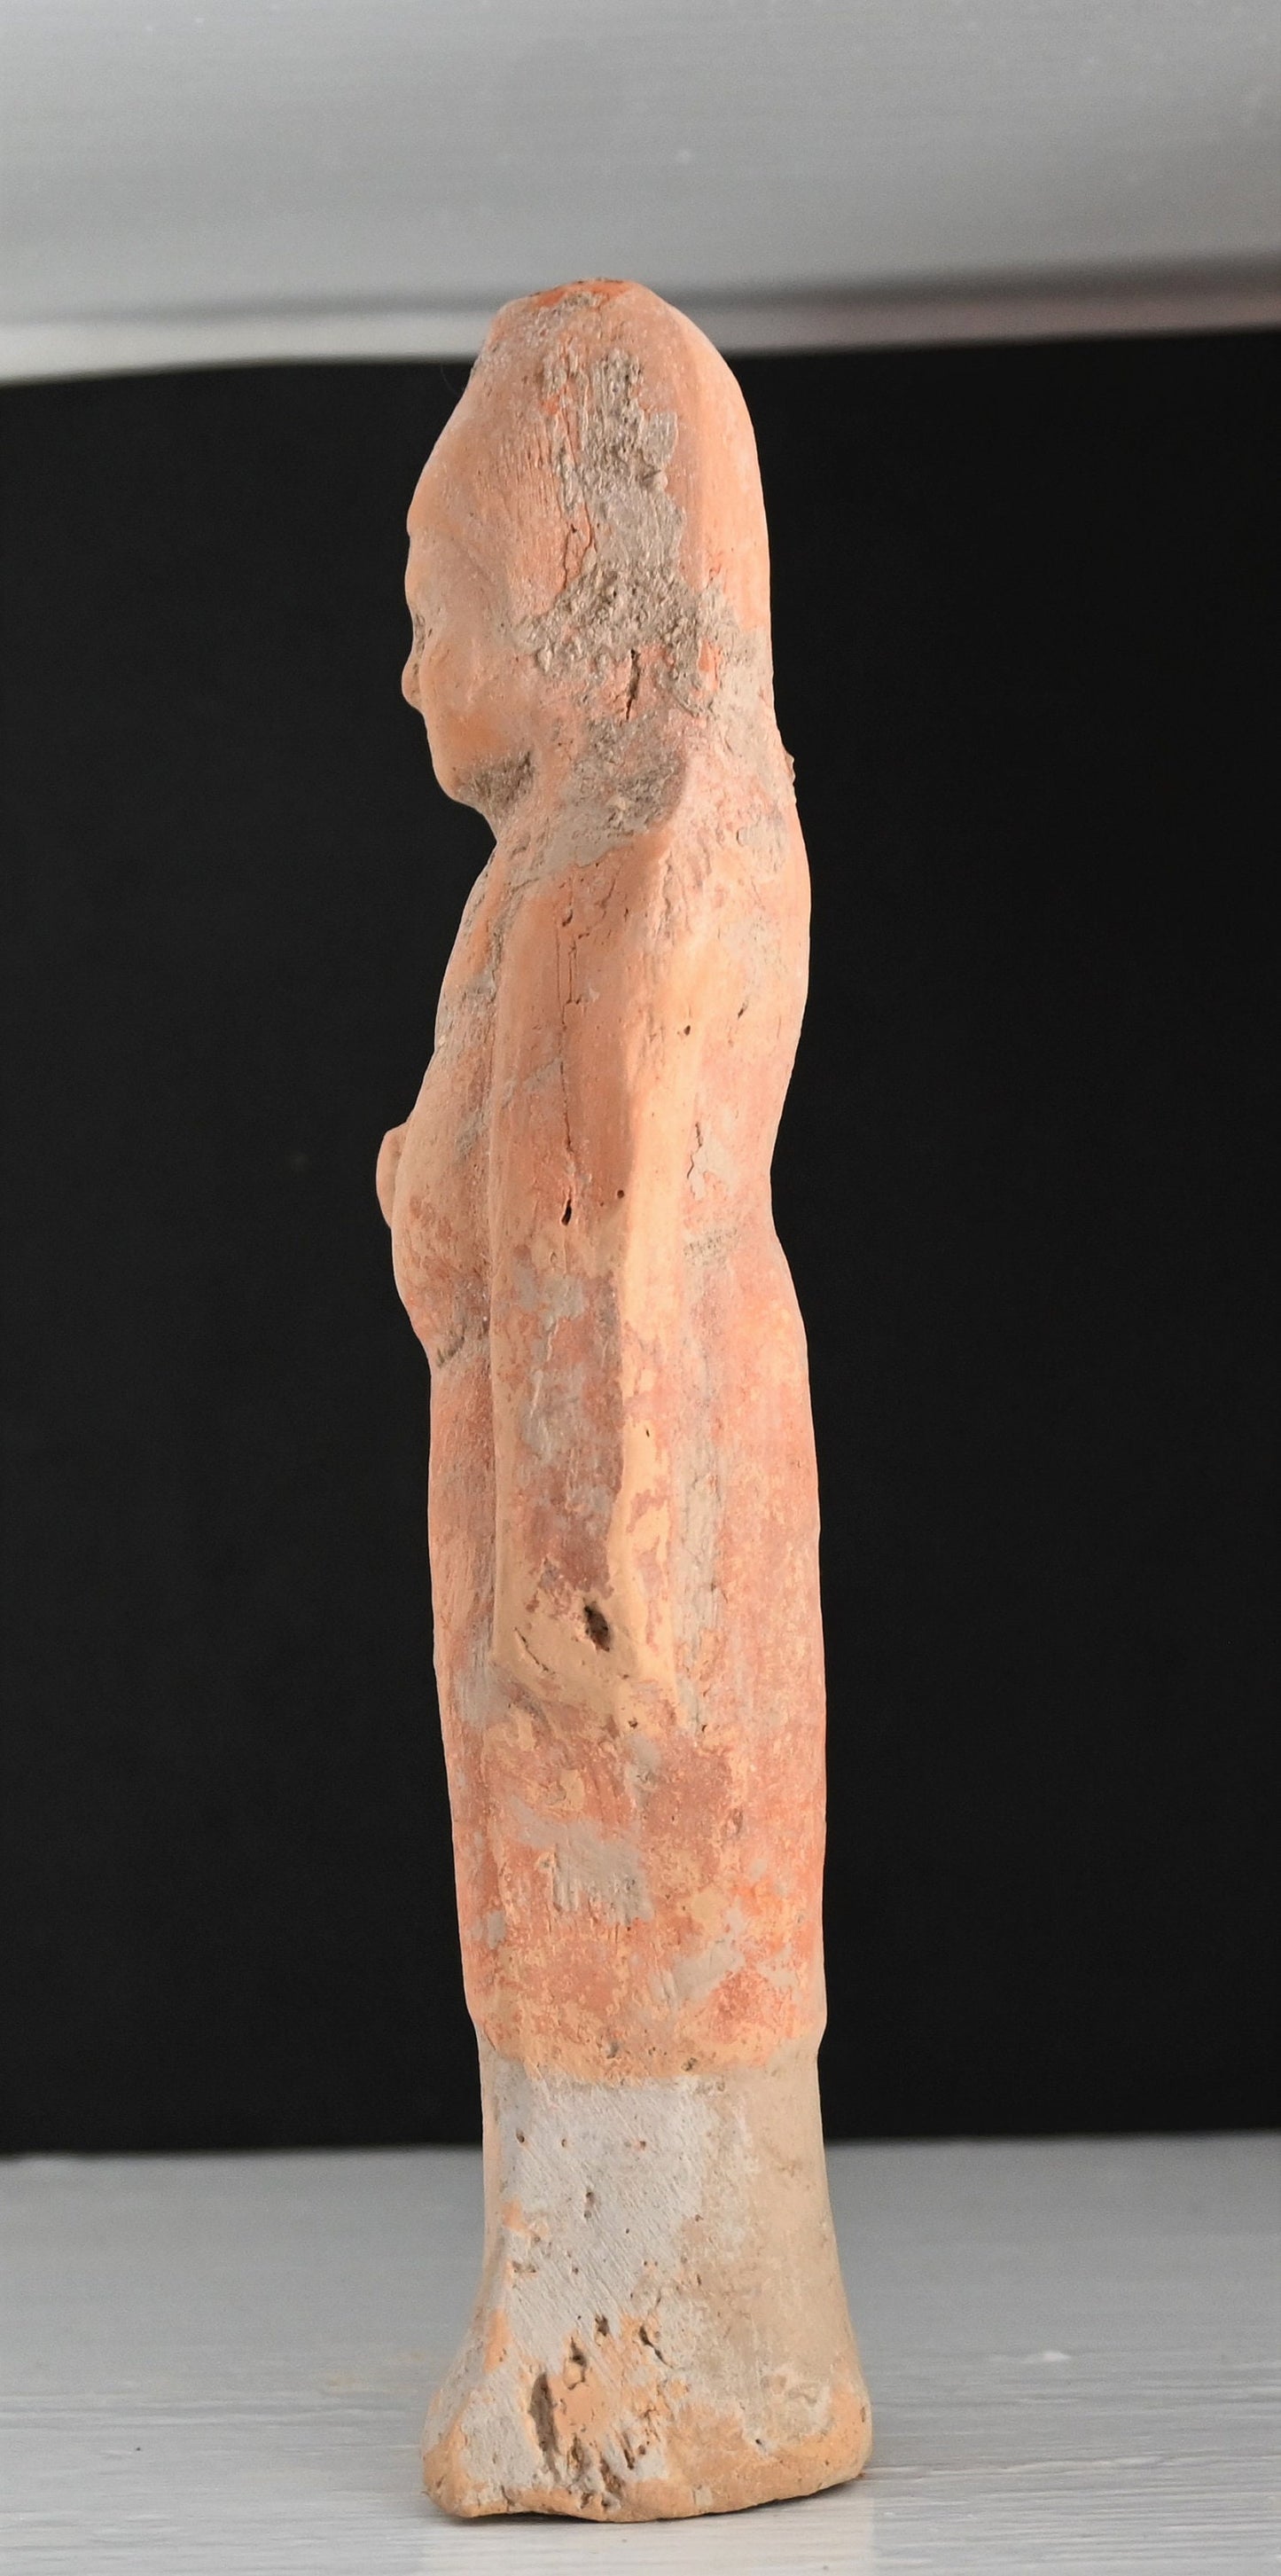 Authentic Han Dynasty, ca. 206 BCE to 220 CE mold-formed terracotta tomb attendant 7 7/8 inches with COA and provenance*+